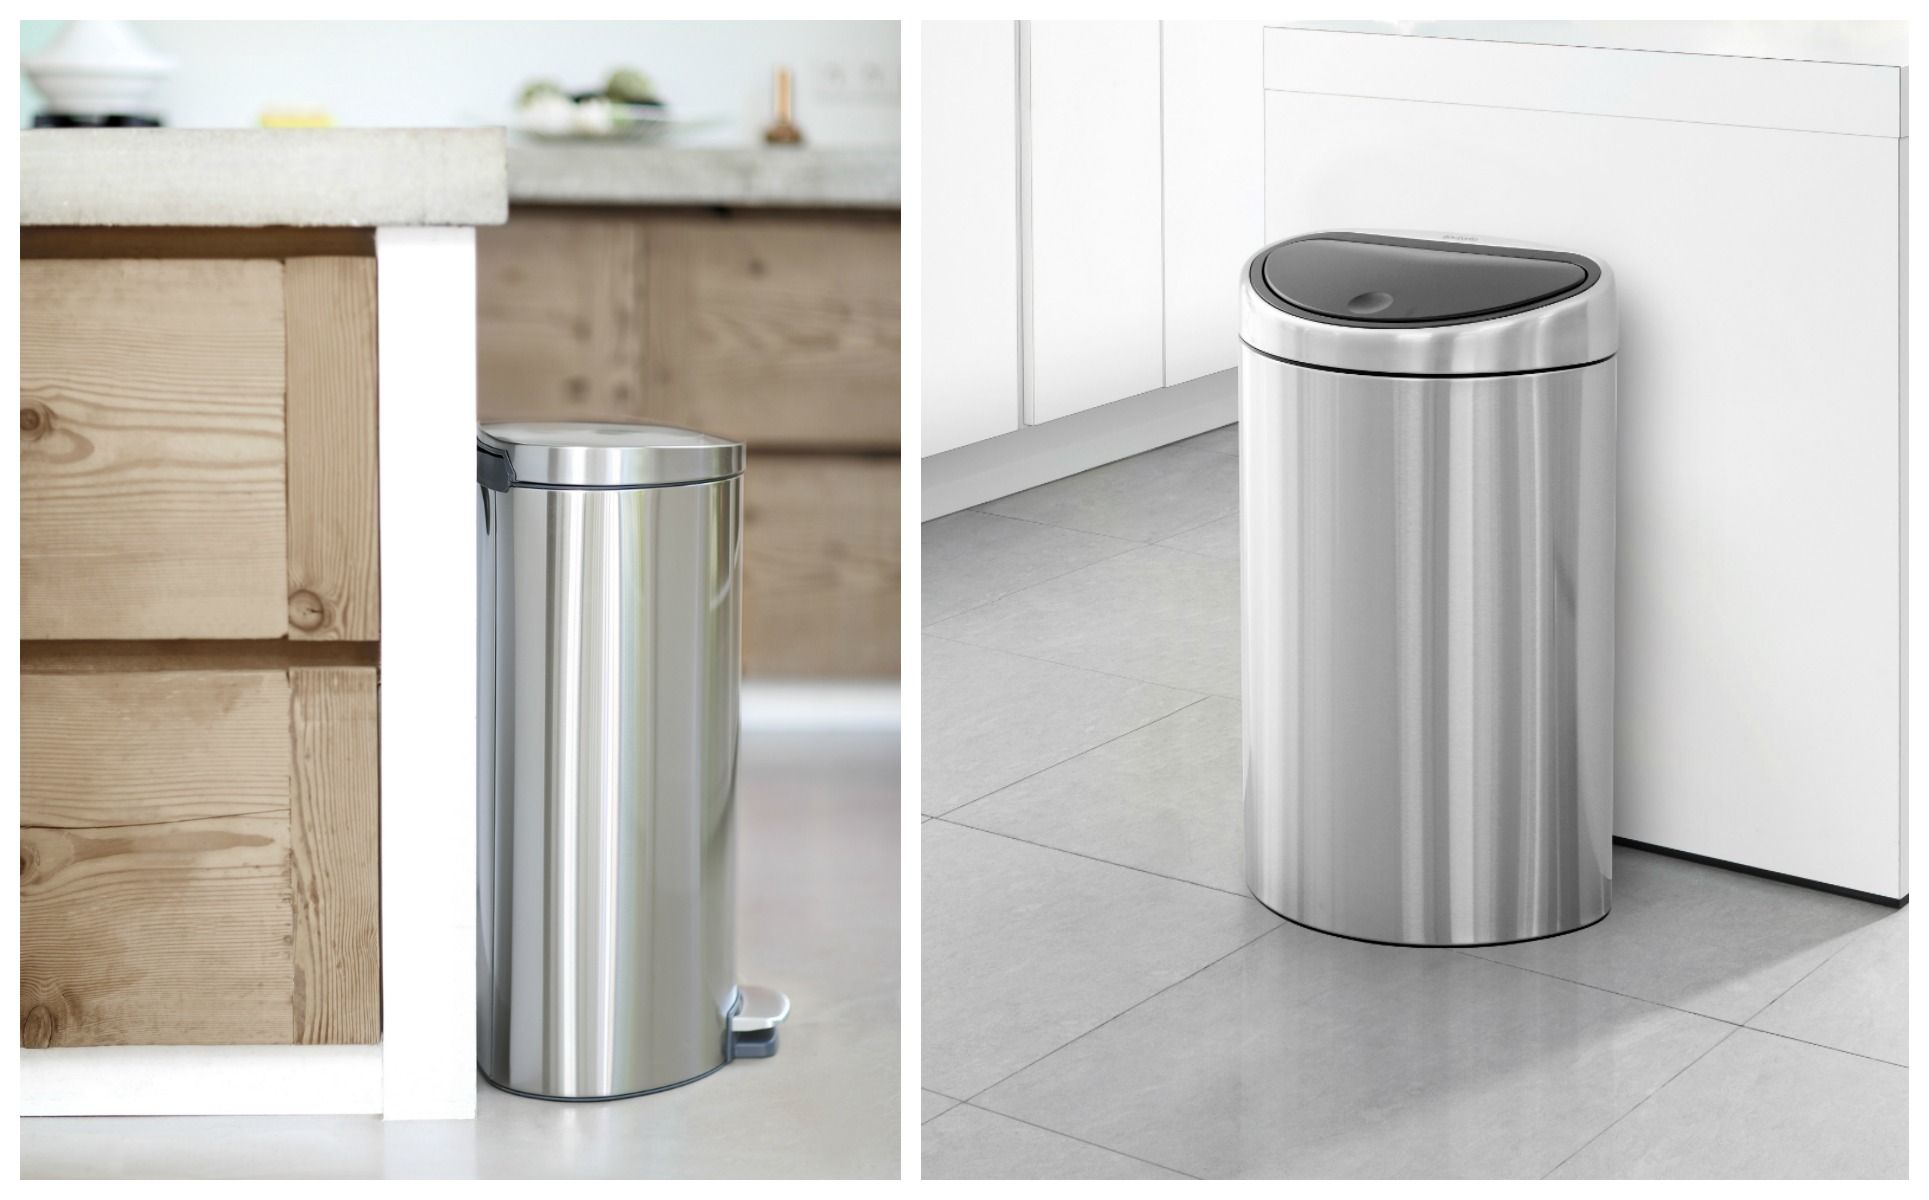 binopolis Twitter: "Sleek statement: our flatback Brabantia duo is space saving &amp; stylish. Which one's for you? The 30L Pedal bin or 40L #binspiration https://t.co/oeyHiO4x8a" Twitter